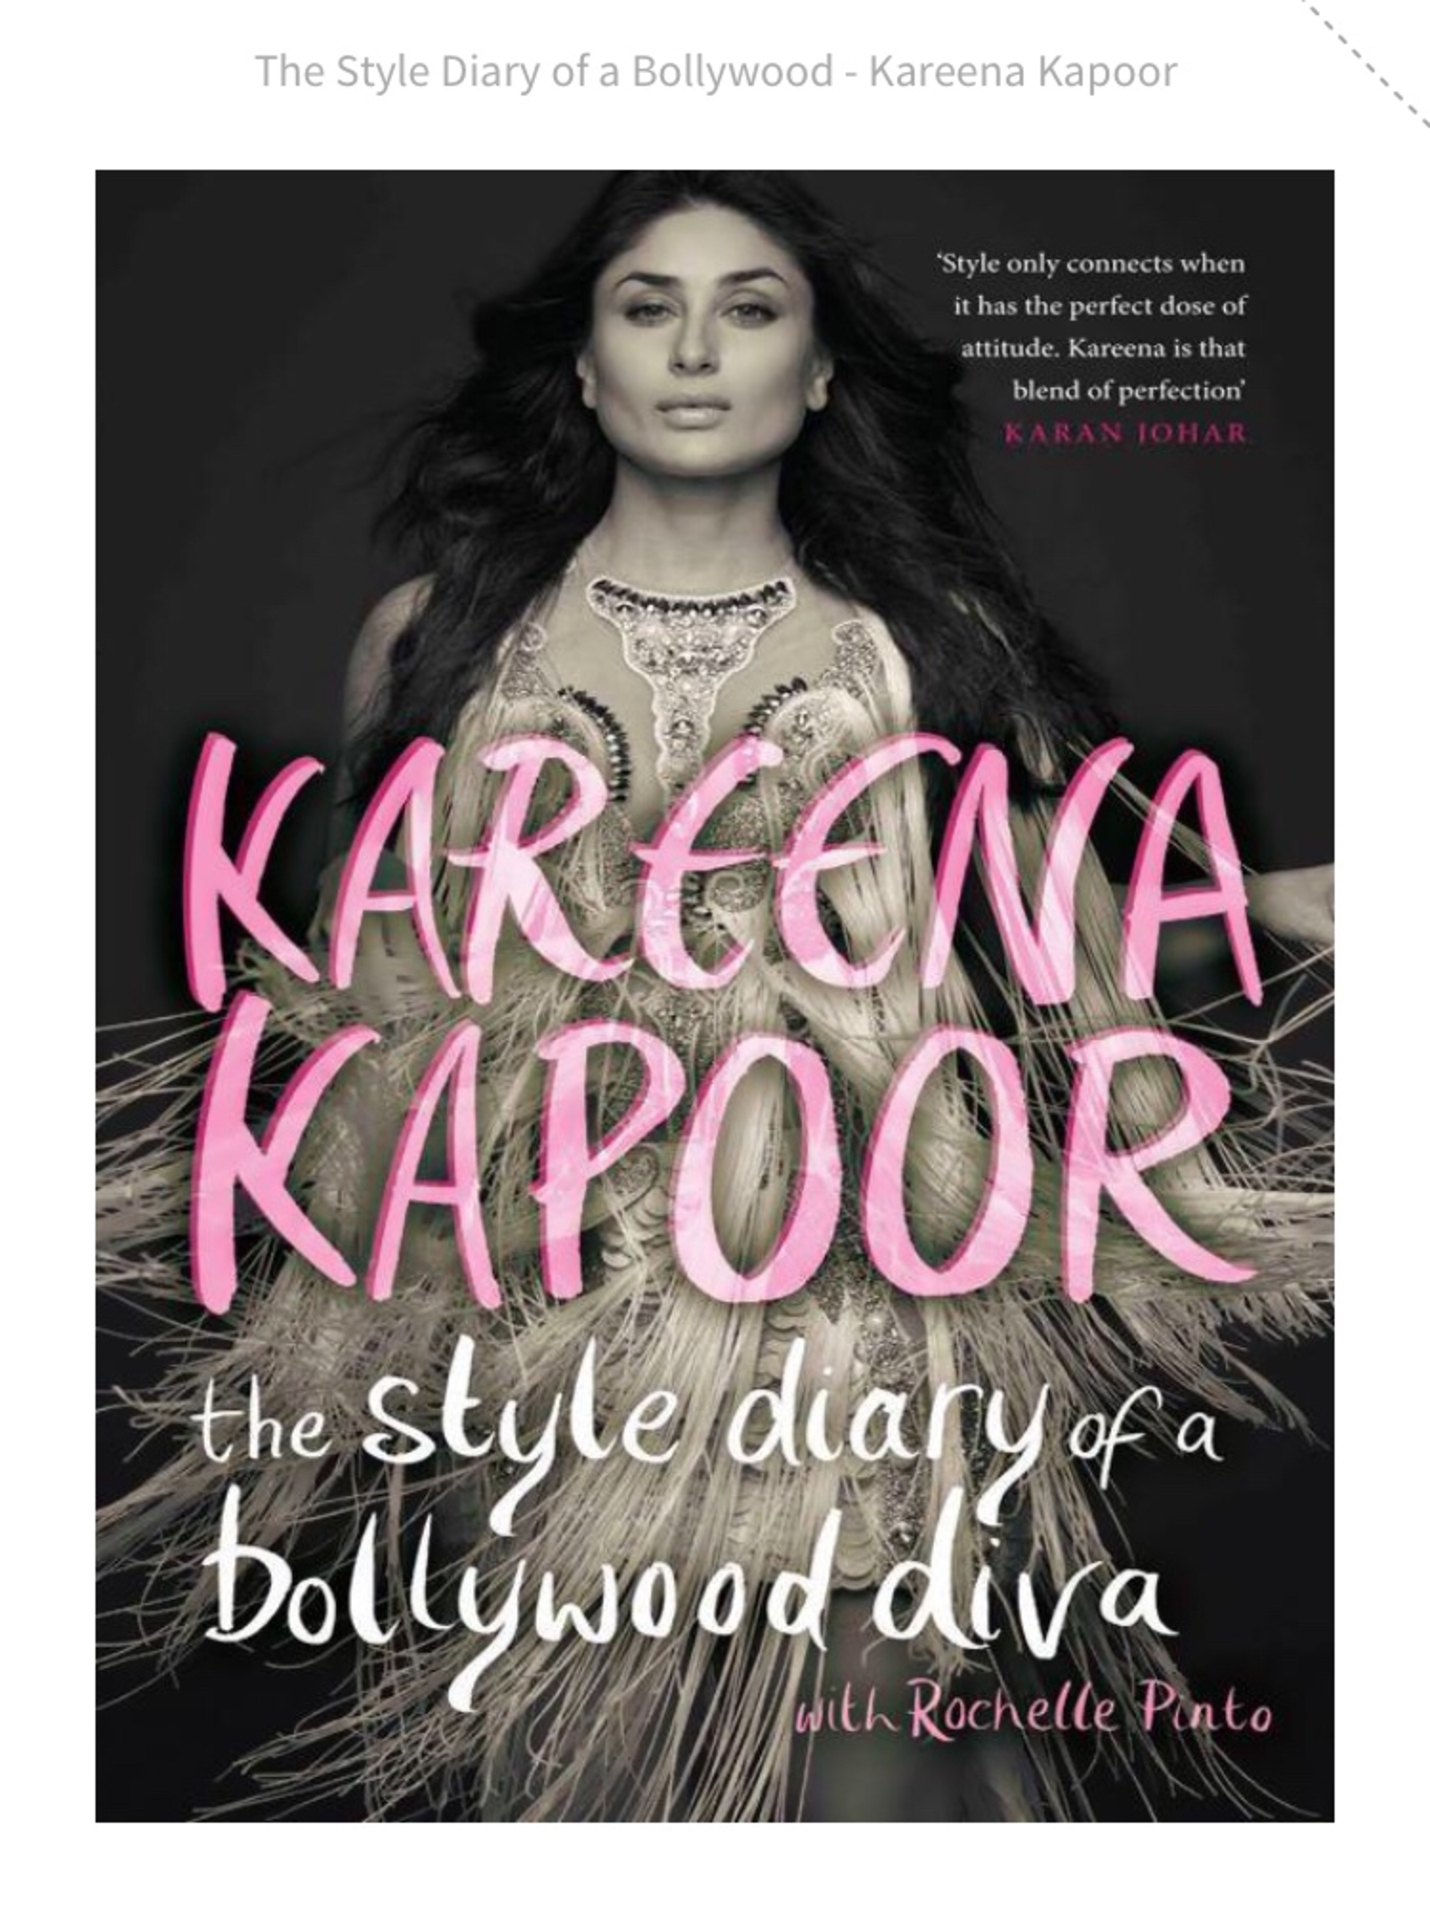 The Style diary of a Bollywood Diva - The book image